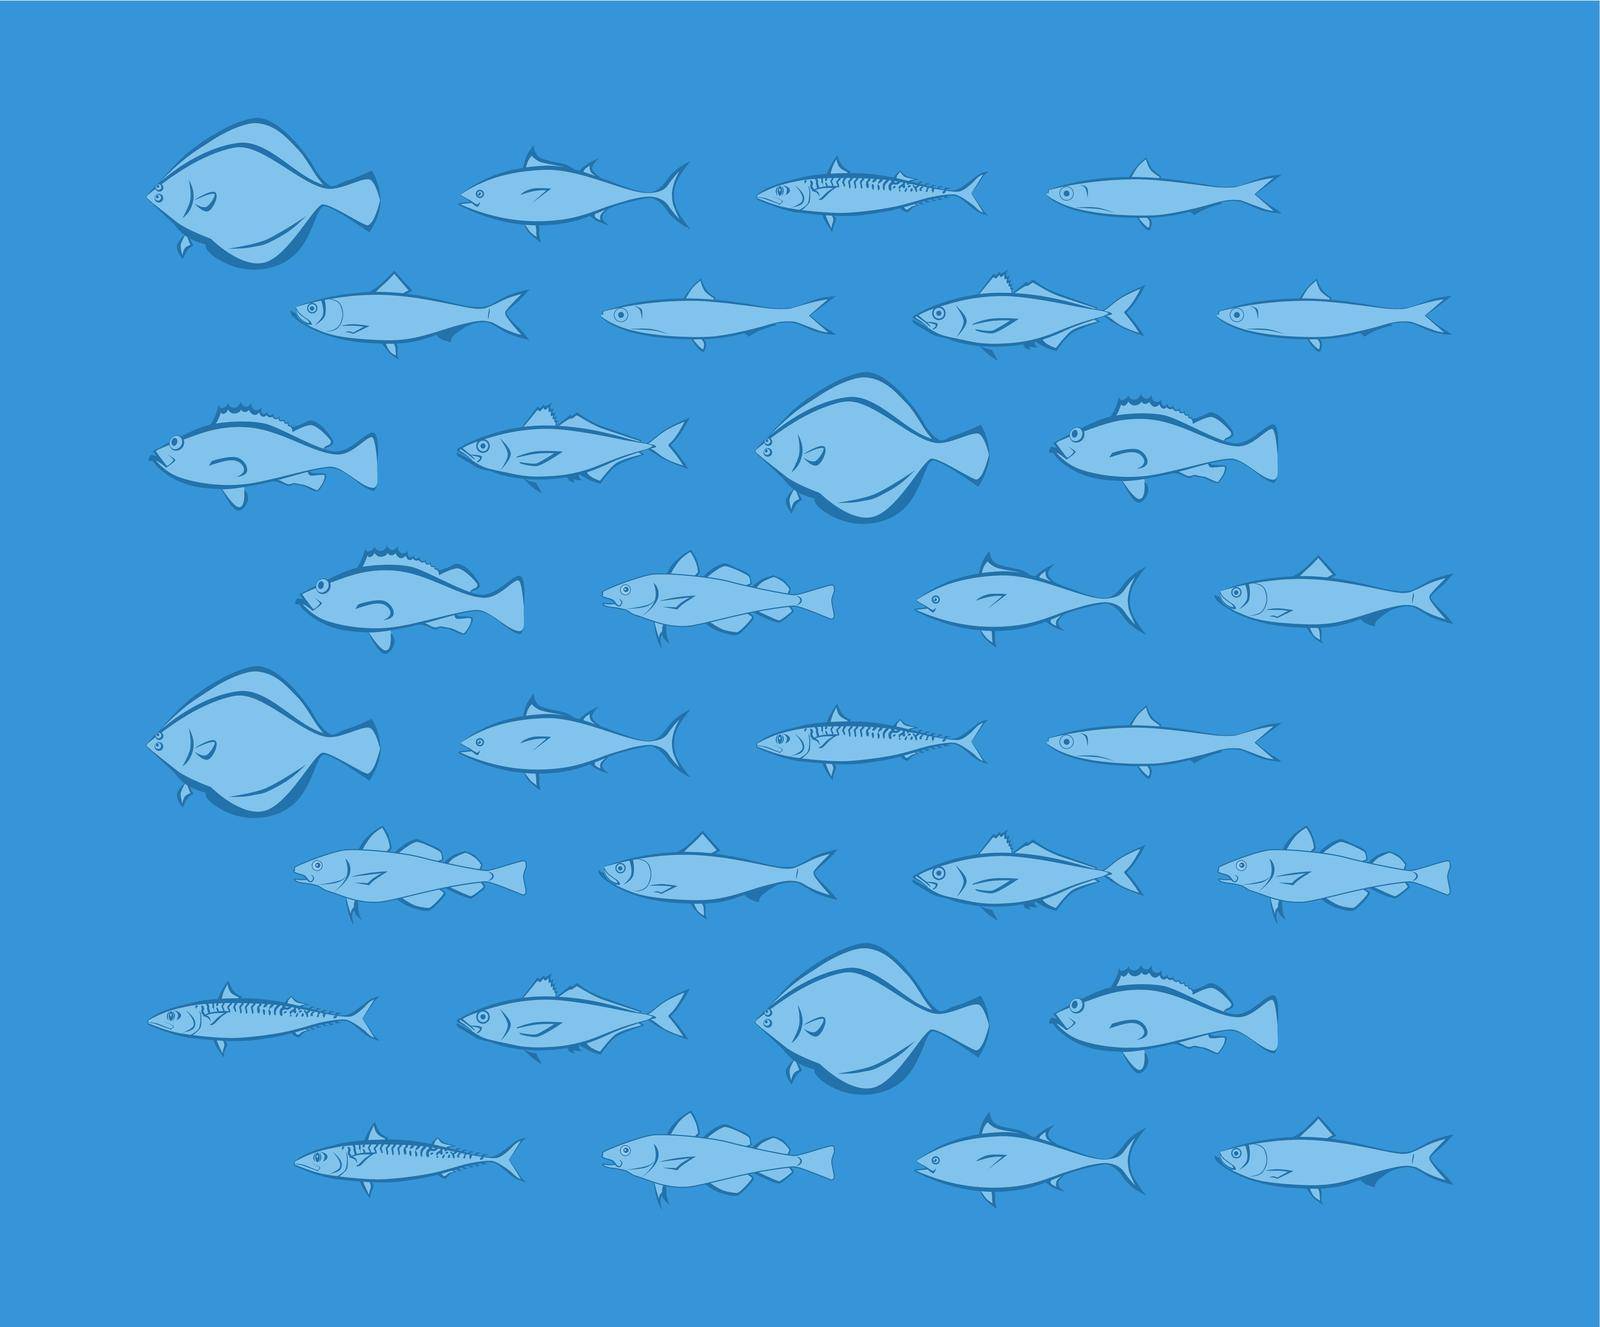 Nautical Wallpaper, Sea Fishes on Blue Background, Vector Illustration